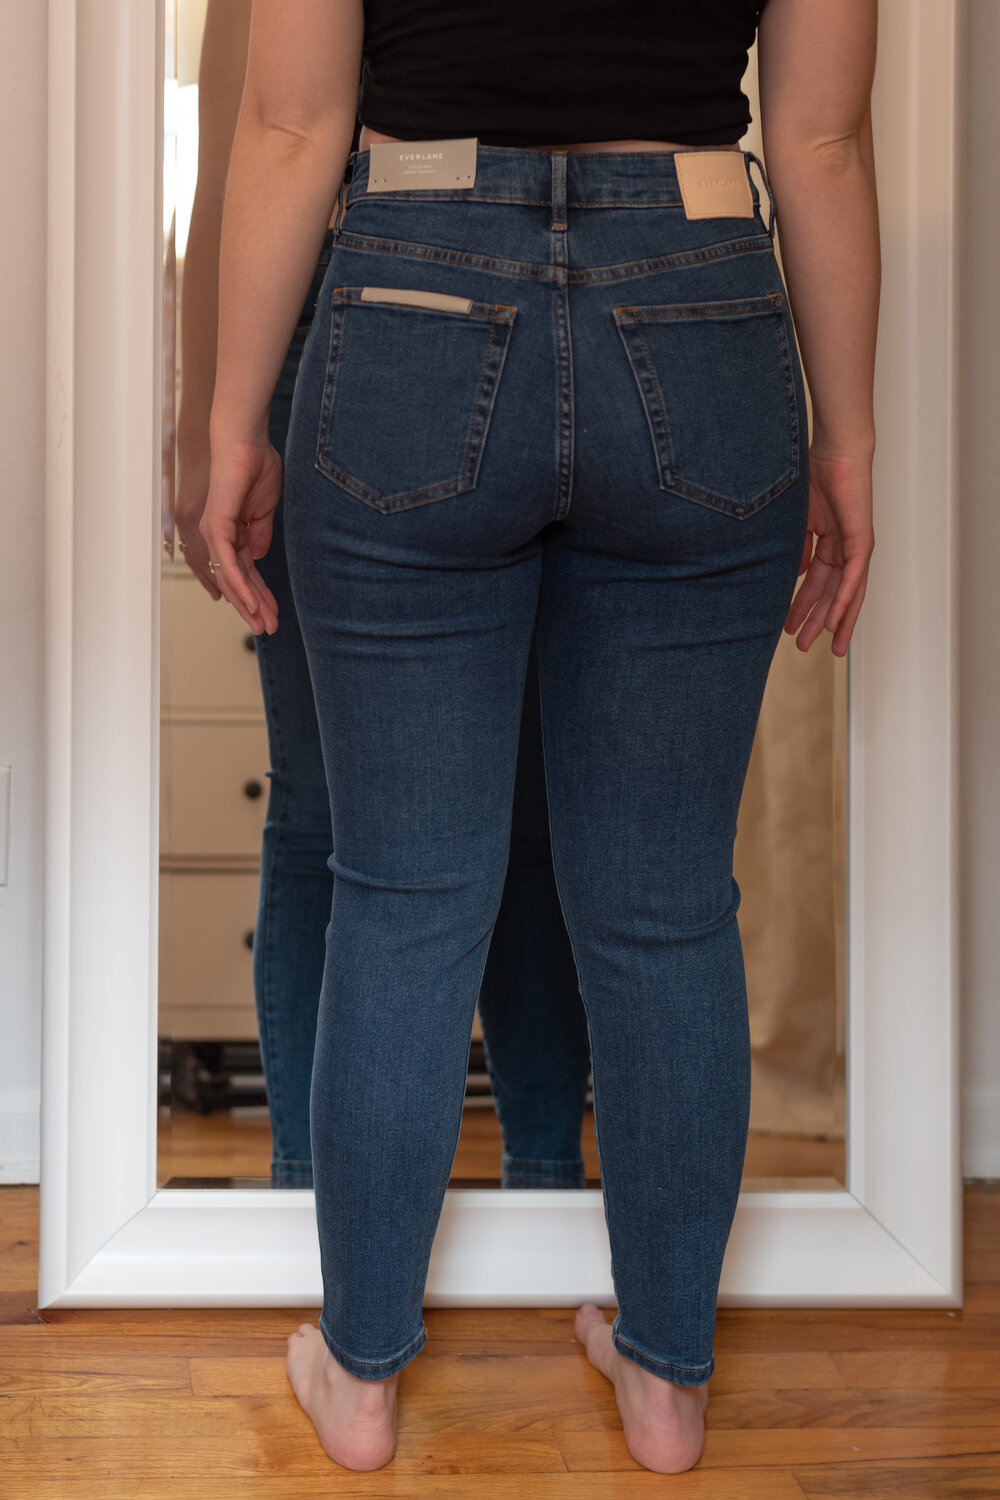 EVERLANE AUTHENTIC STRETCH CURVY FIT REVIEW — The Petite Pear Project